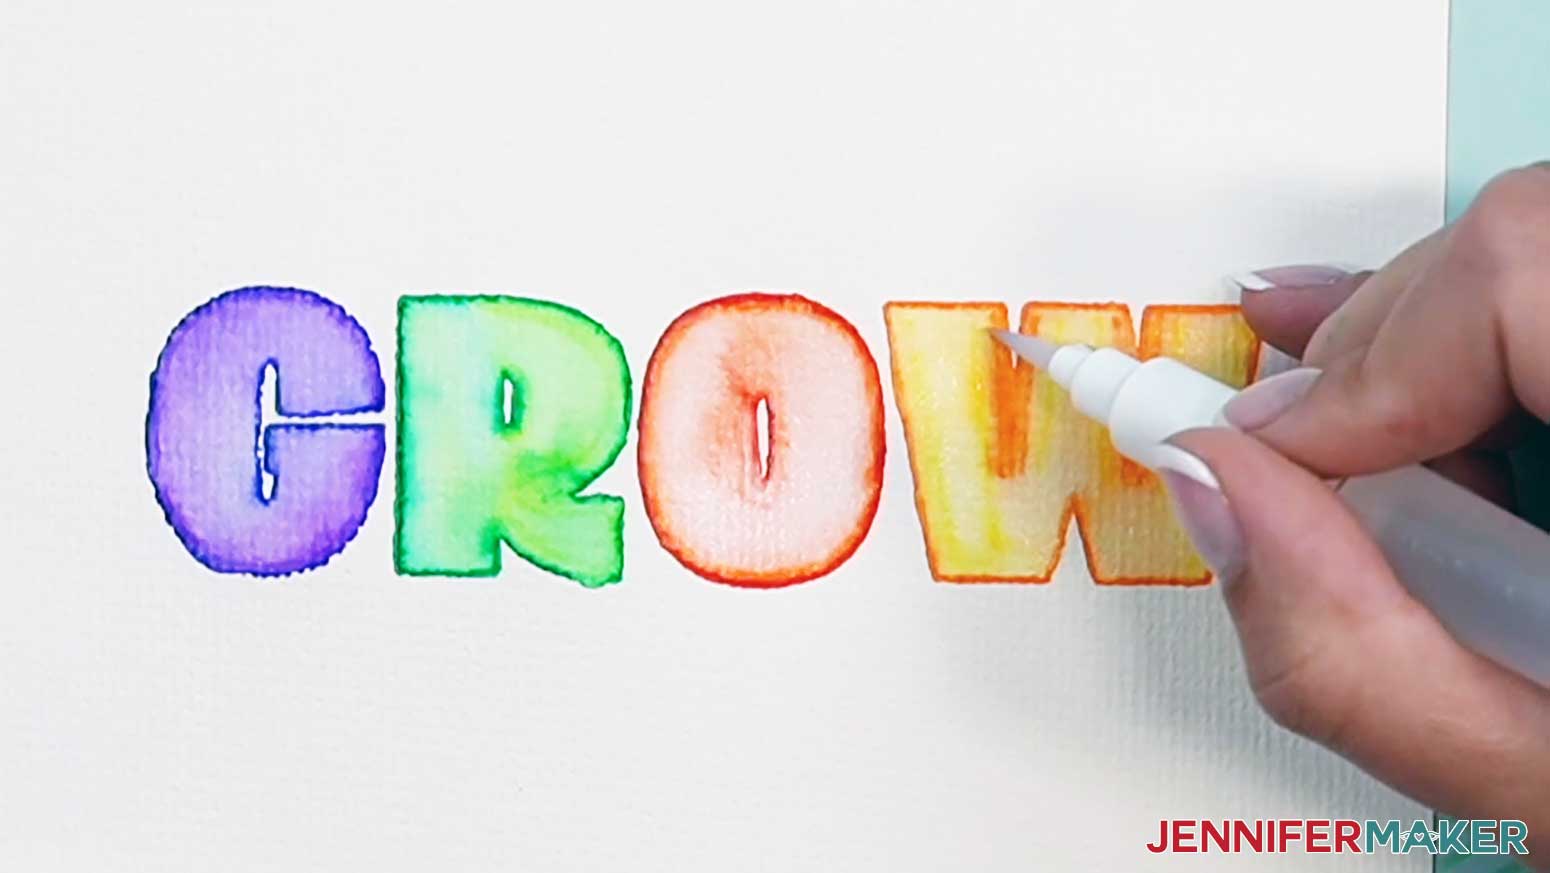 Continue to blend all the colors in the watercolor word GROW to fill in the letters.